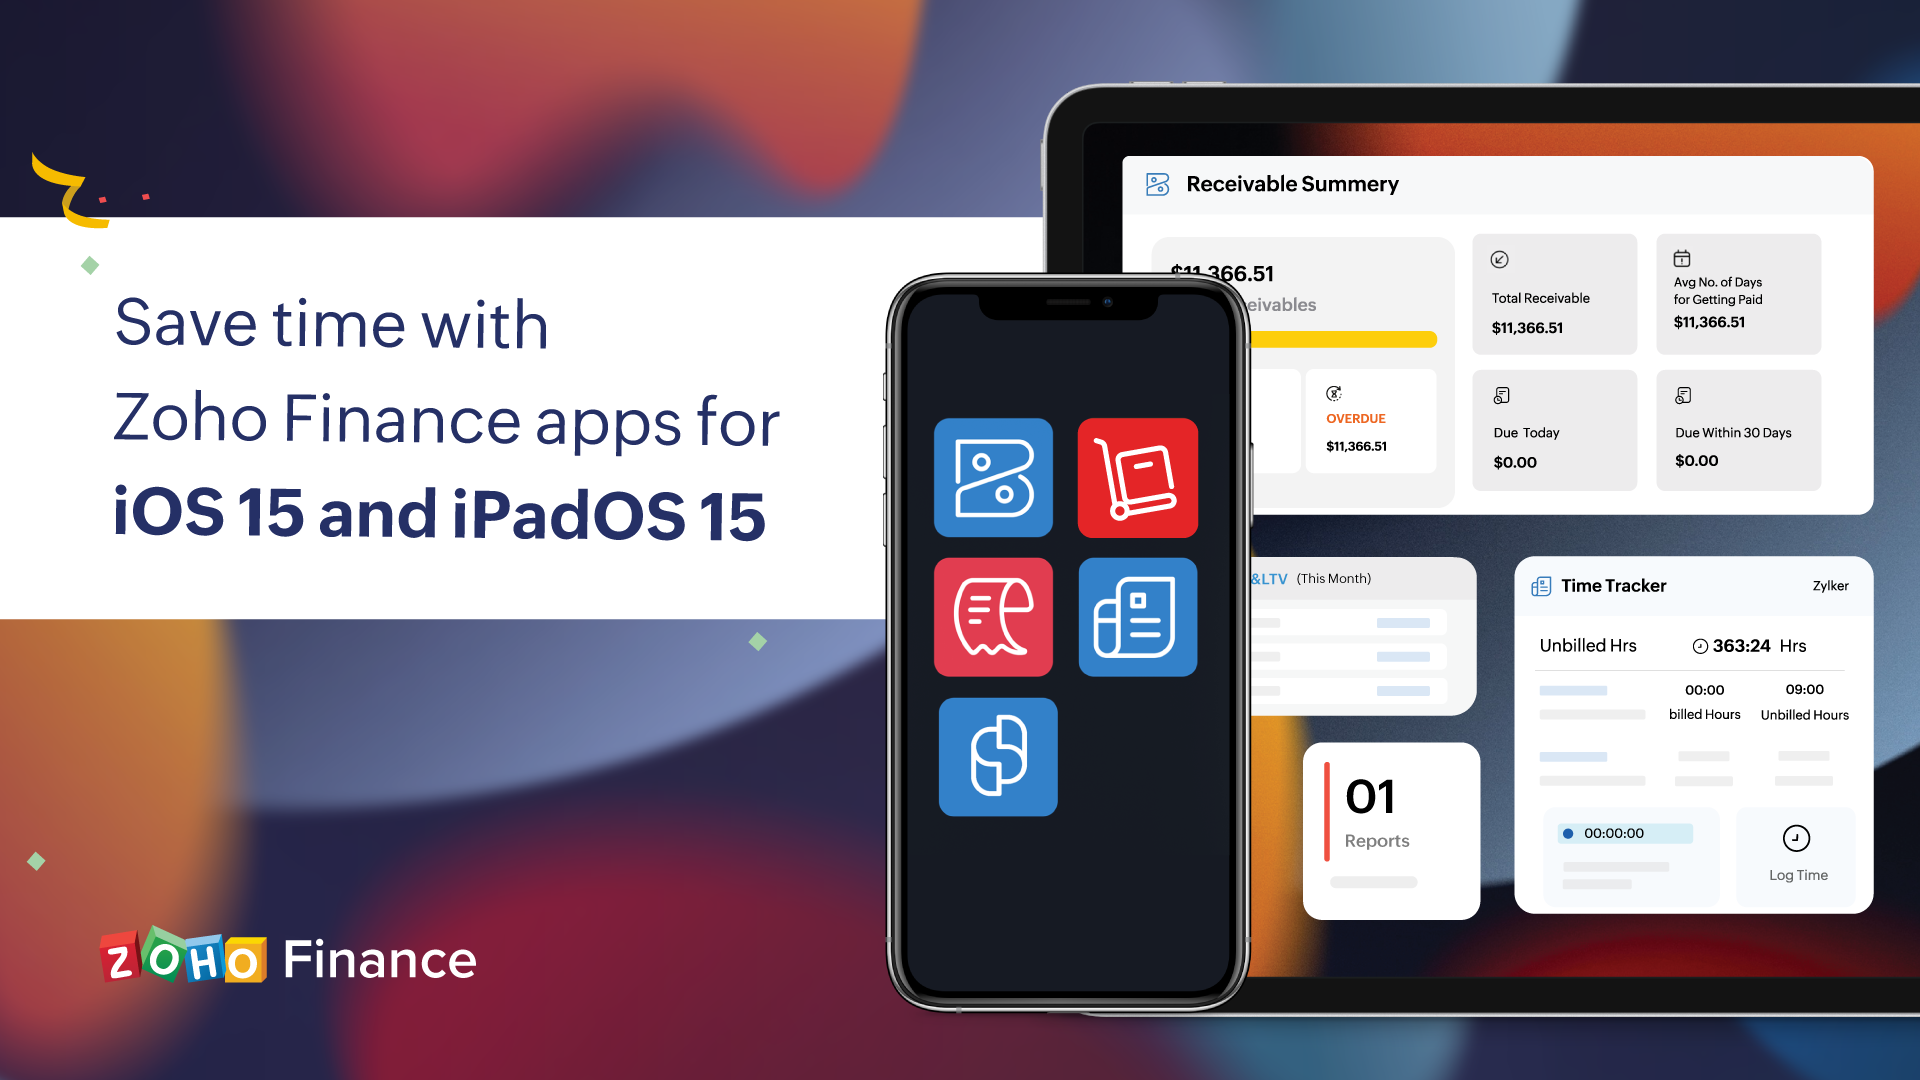 Live Text, extra-large widgets, and more: Save time with Zoho Finance apps for iOS 15 and iPadOS 15